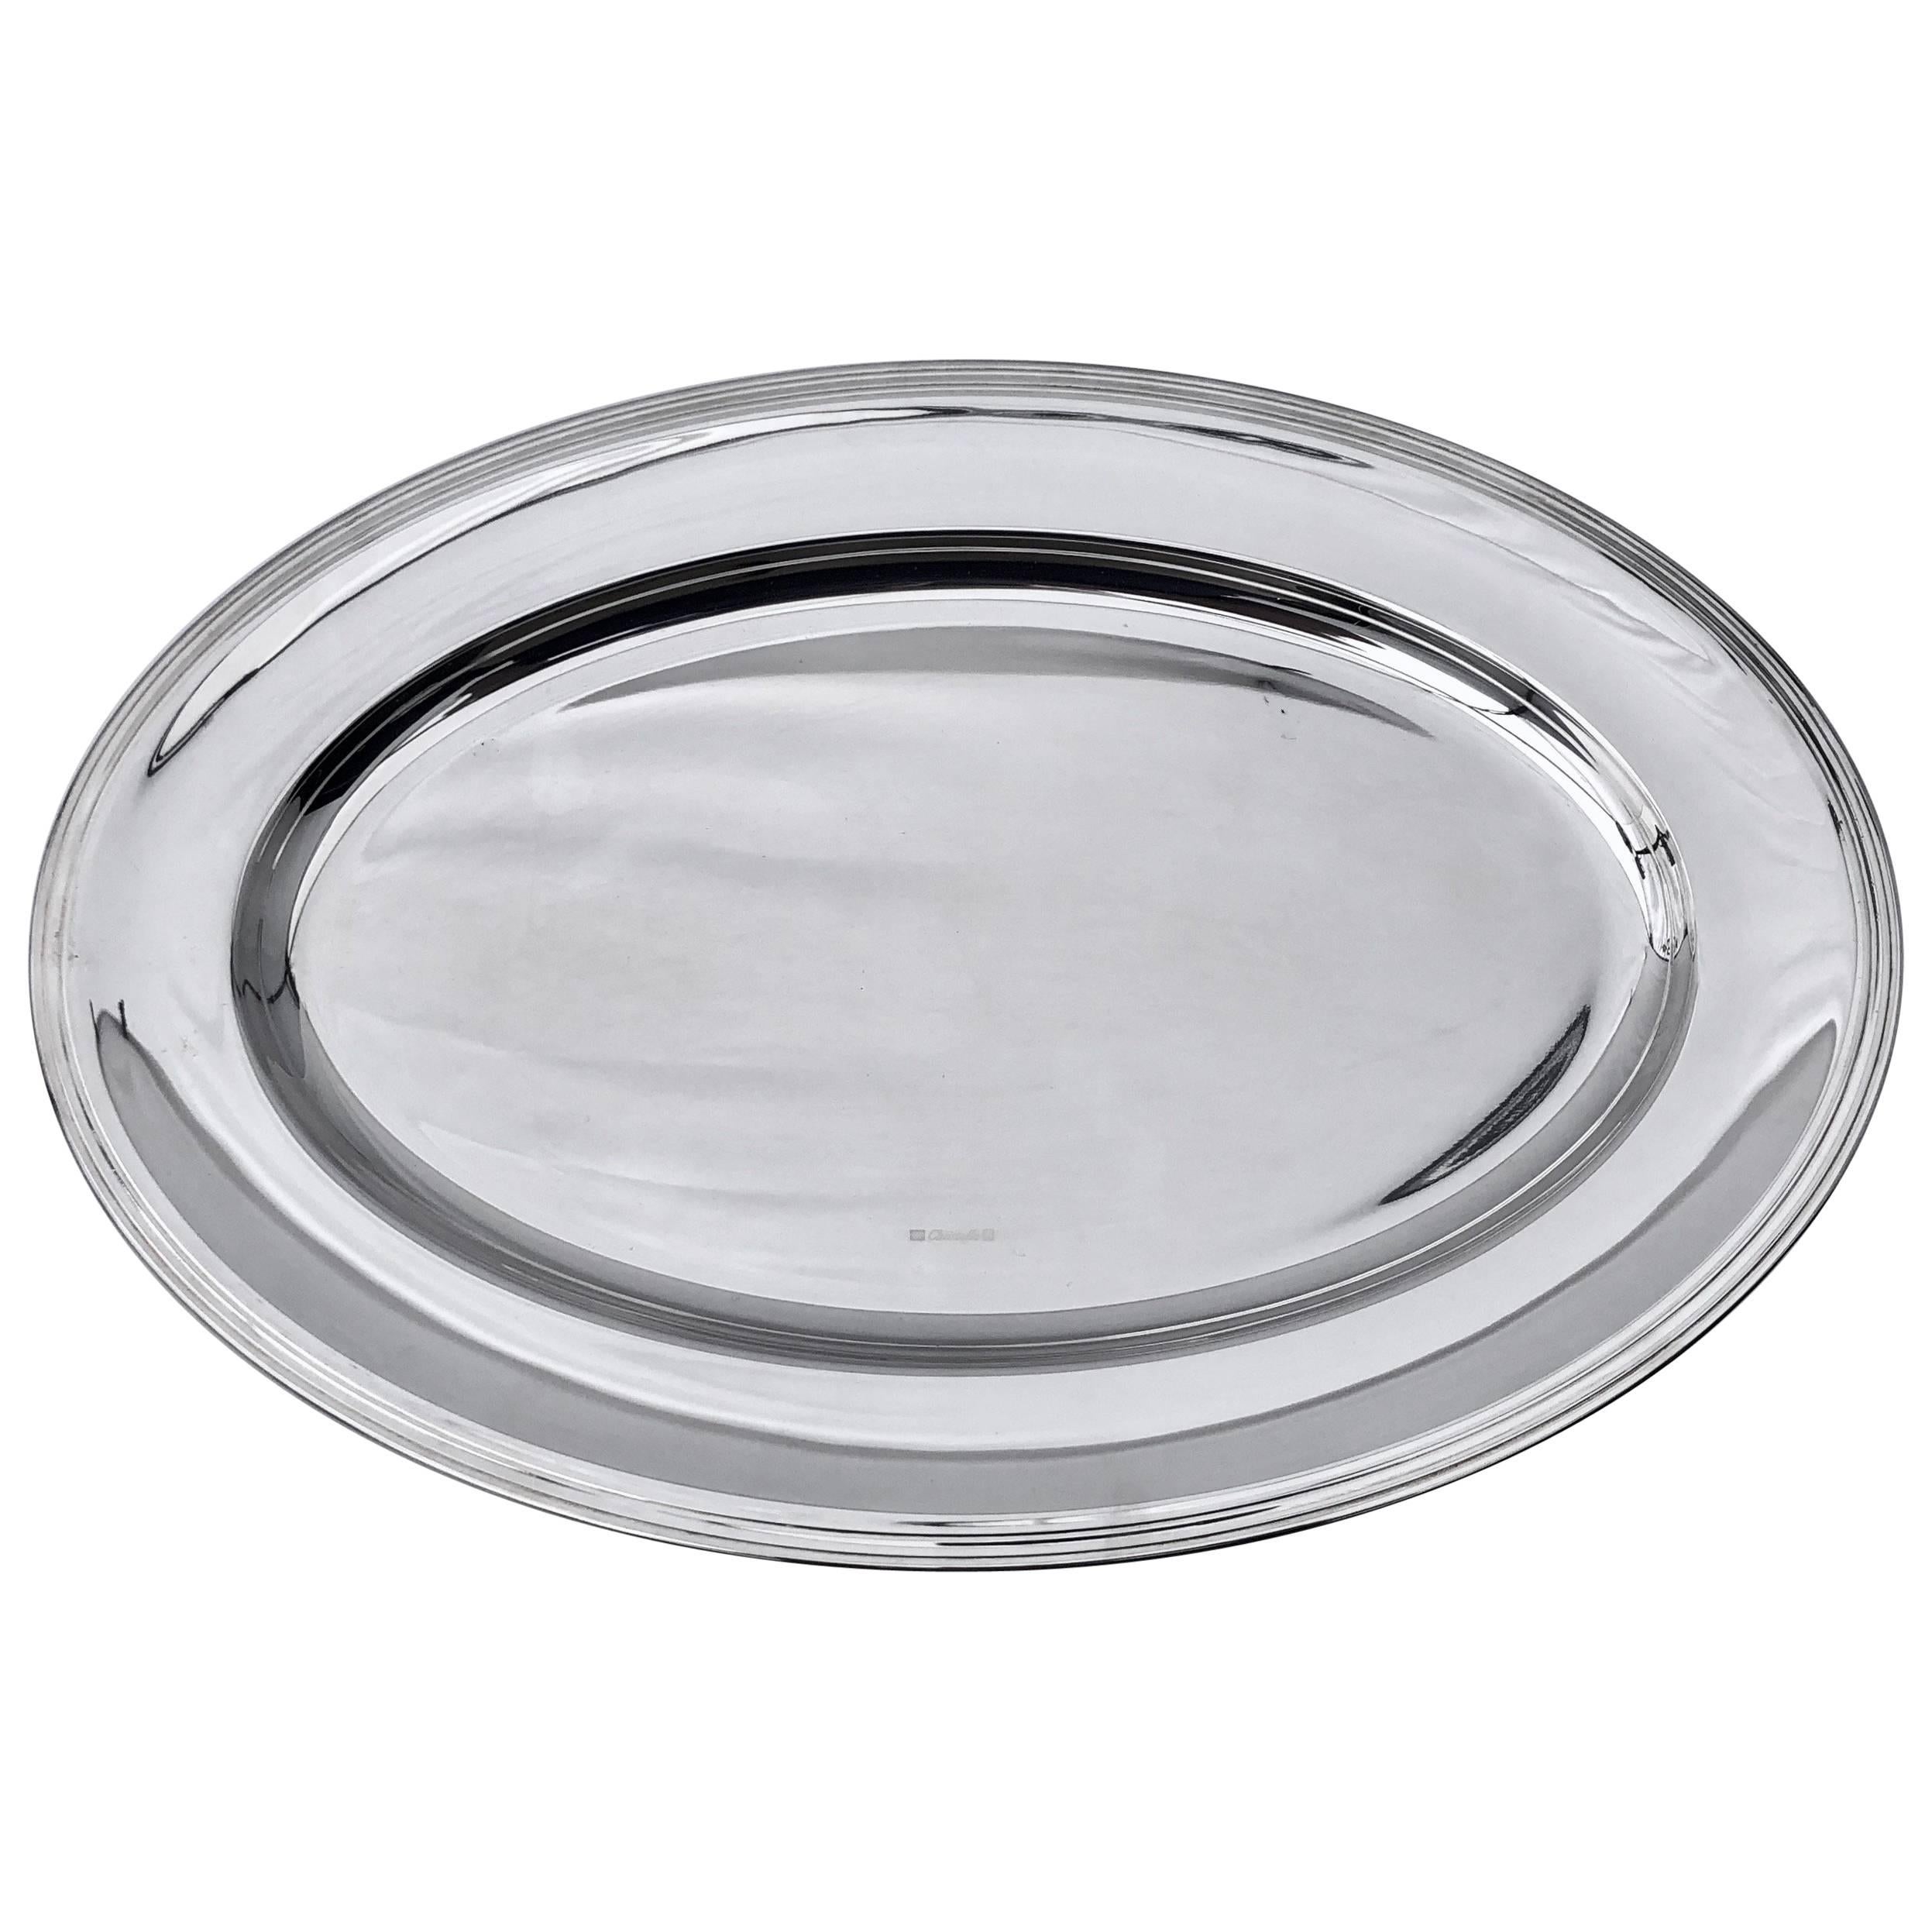 Christofle Silver Plated Oval Platter, Never Used, Model Clery, in It's Box For Sale